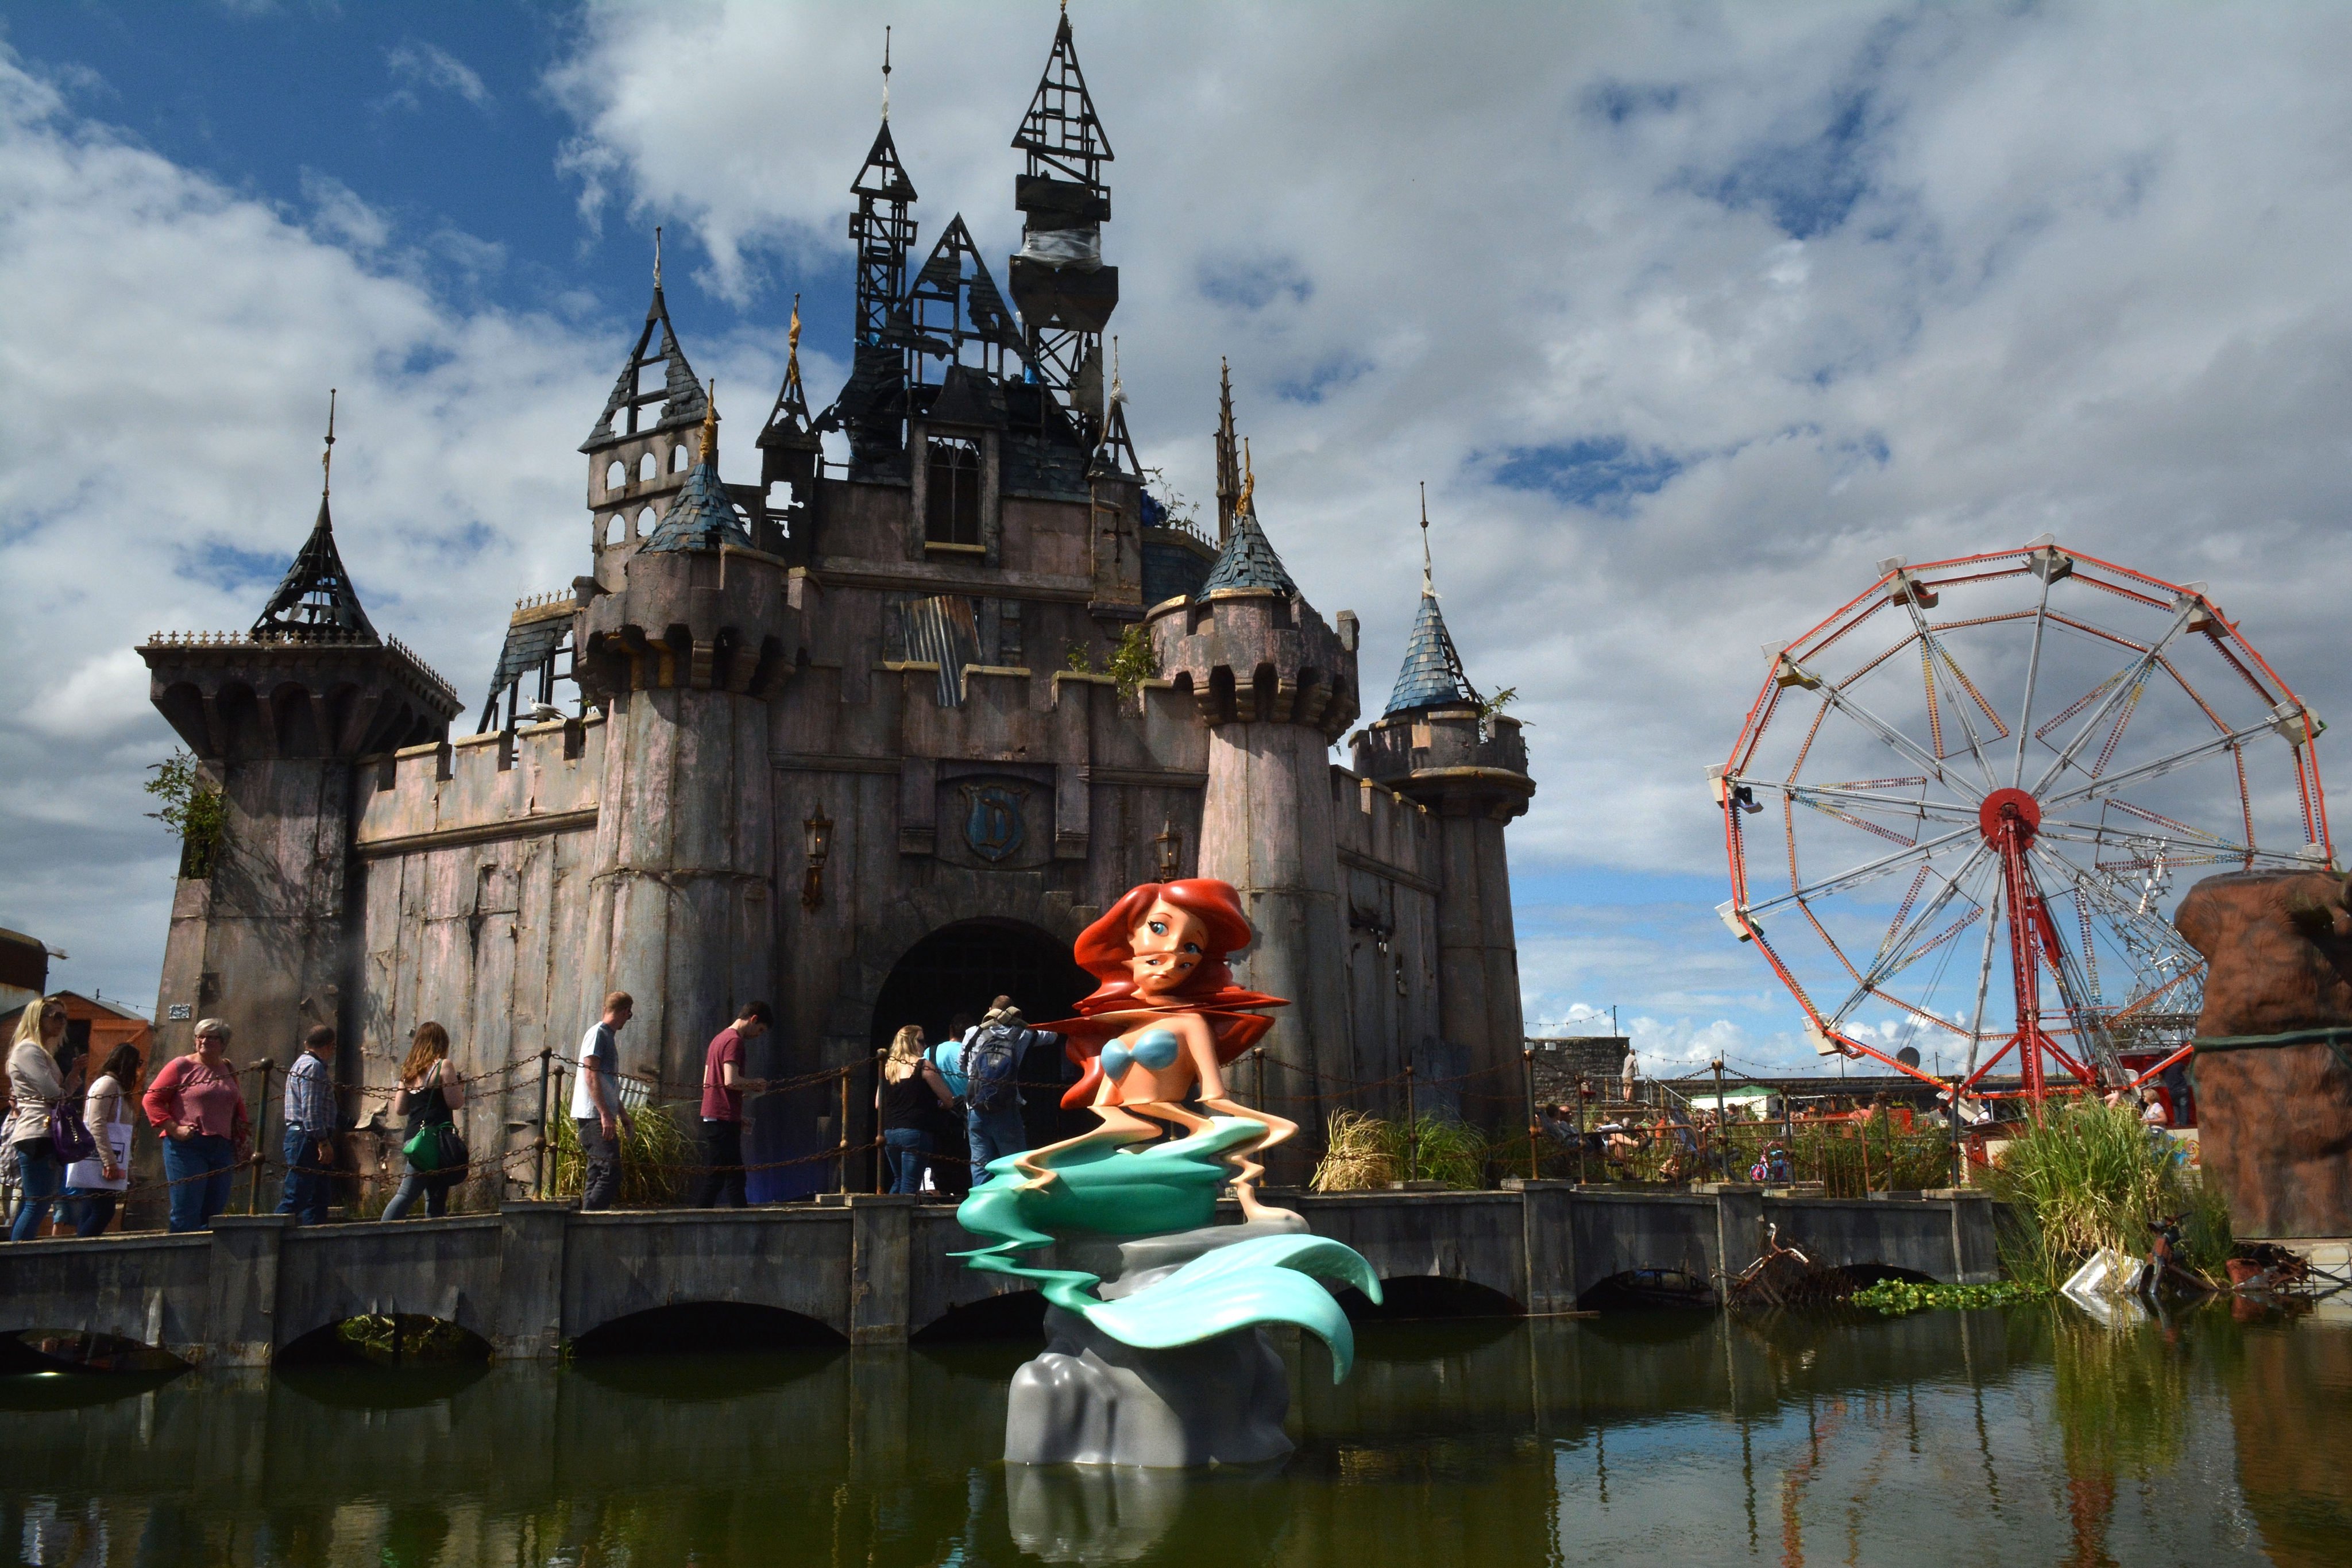 A mermaid sculpture sits in front of a fairy castle at Banksy’s Dismaland amusement park parody in Weston-super-Mare, England, in 2015. Photo: Getty Images